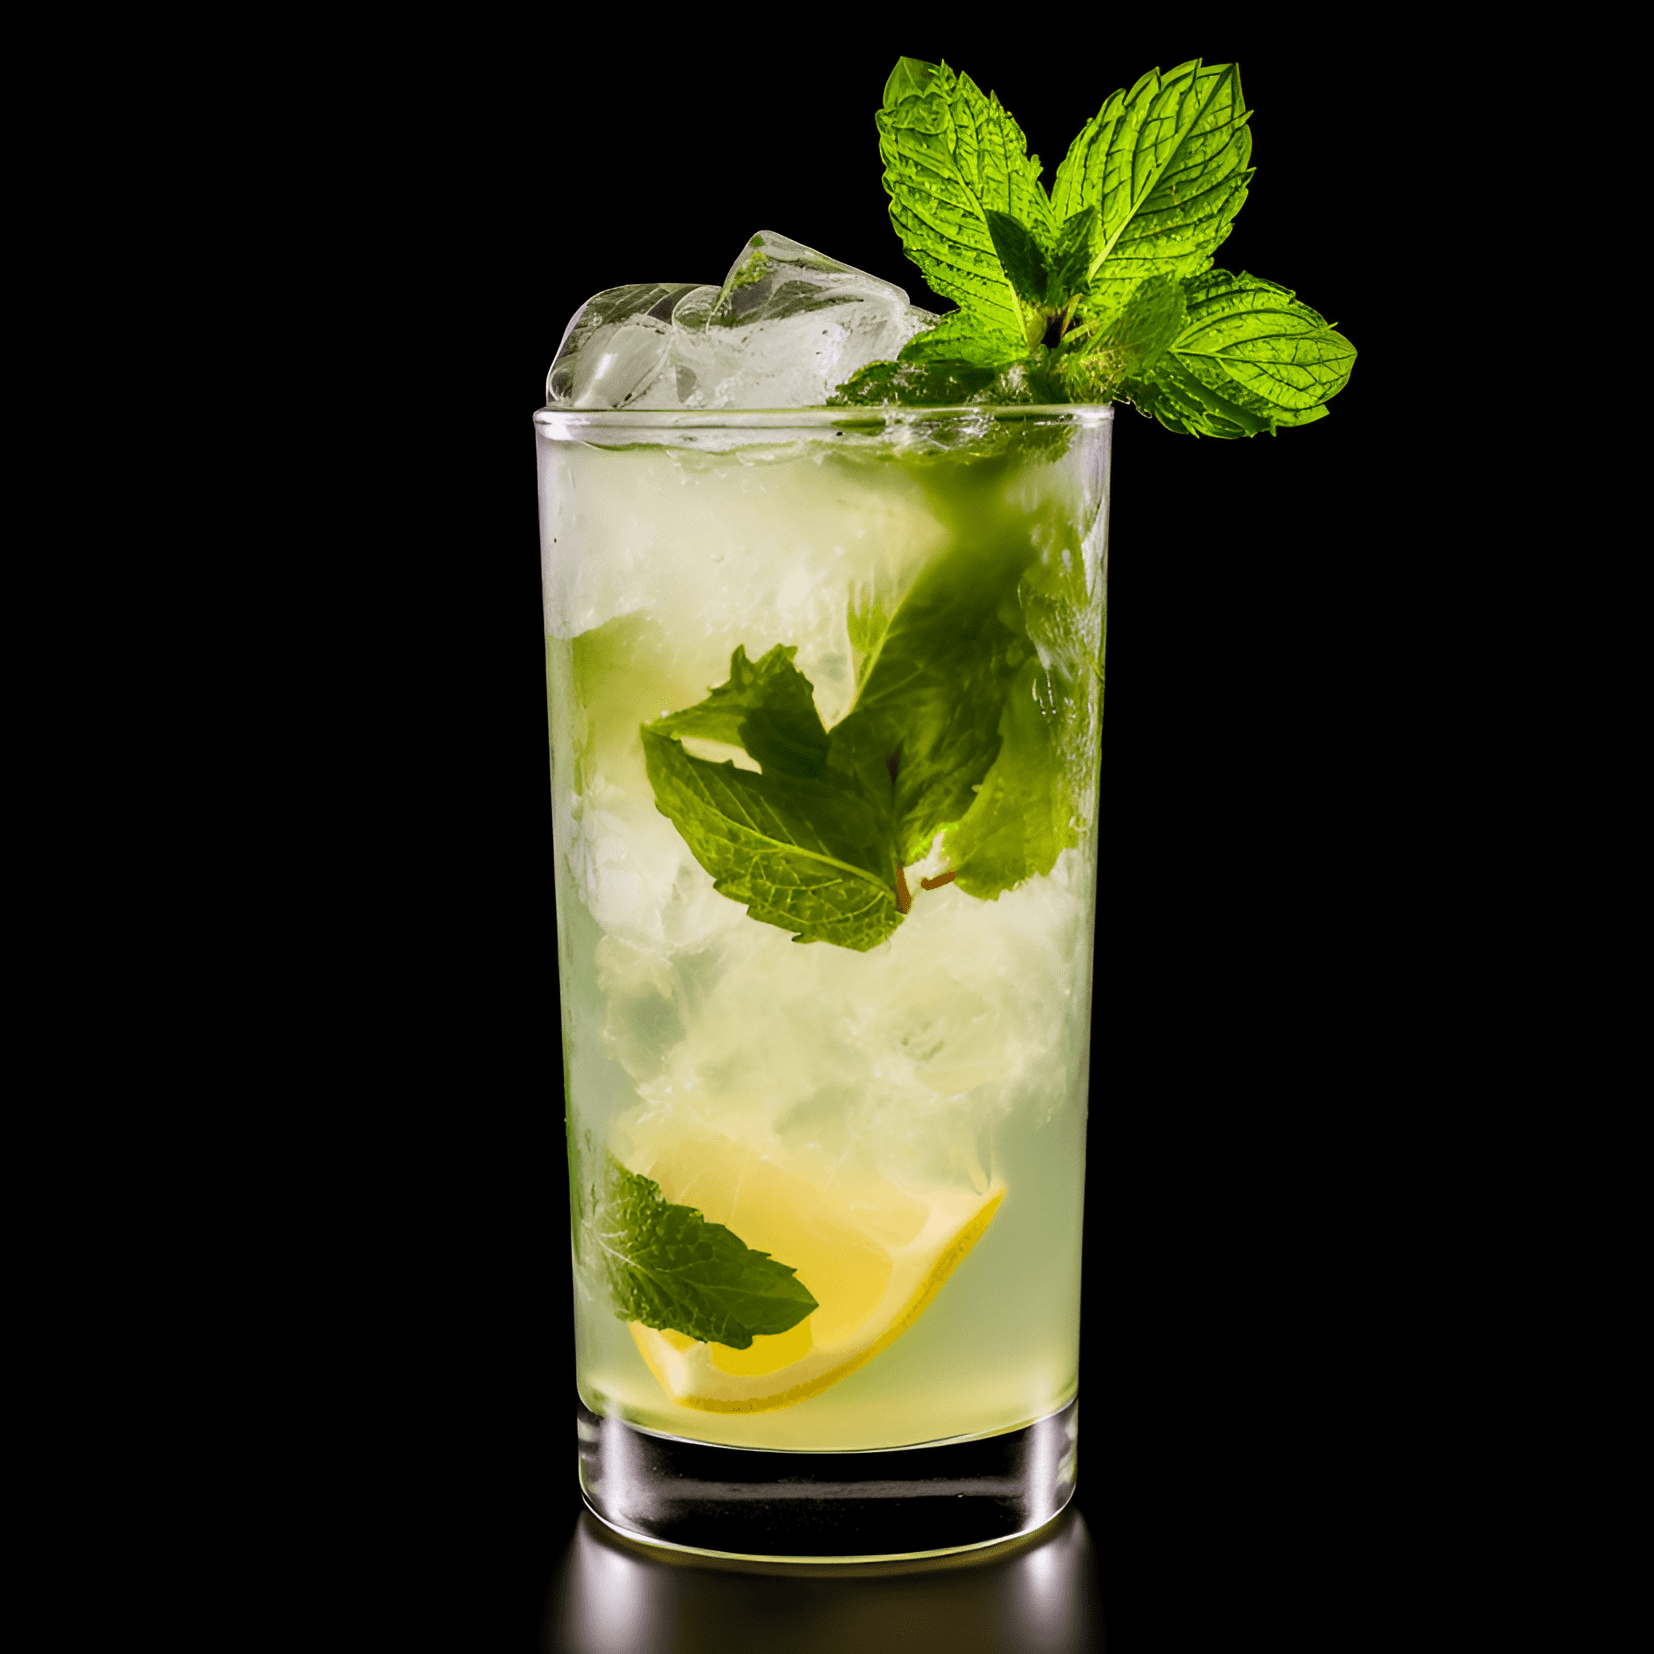 Golfer's Delight Cocktail Recipe - The Golfer's Delight is a light, crisp, and refreshing cocktail with a perfect balance of sweet and sour flavors. The combination of citrus and mint provides a zesty and invigorating taste, while the addition of honey adds a subtle sweetness that complements the tartness of the lemon and lime.